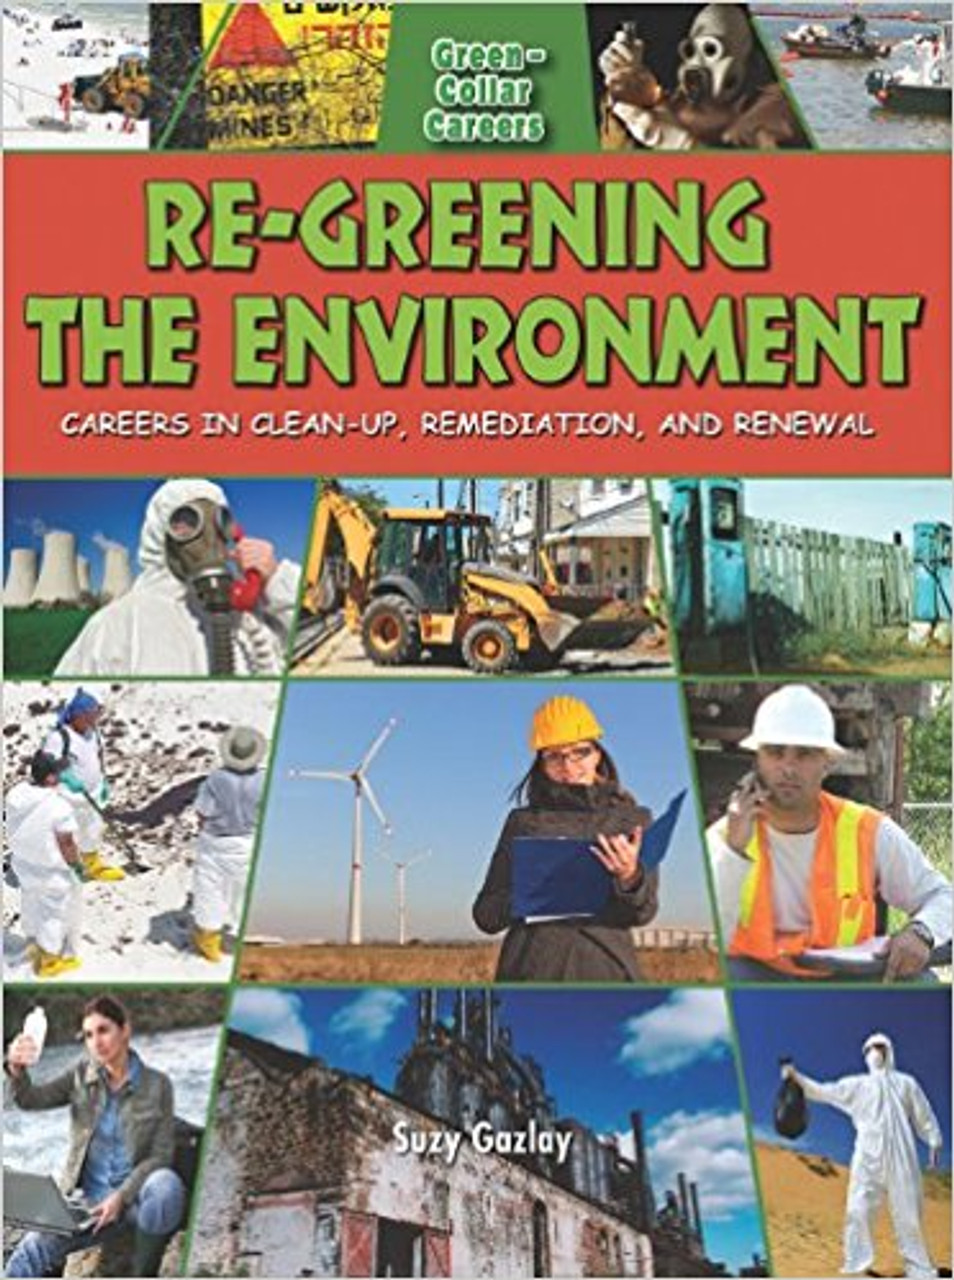 Re-Greening the Environment: Careers in Clean-Up, Remediation, and Renewal by Suzy Gazlay